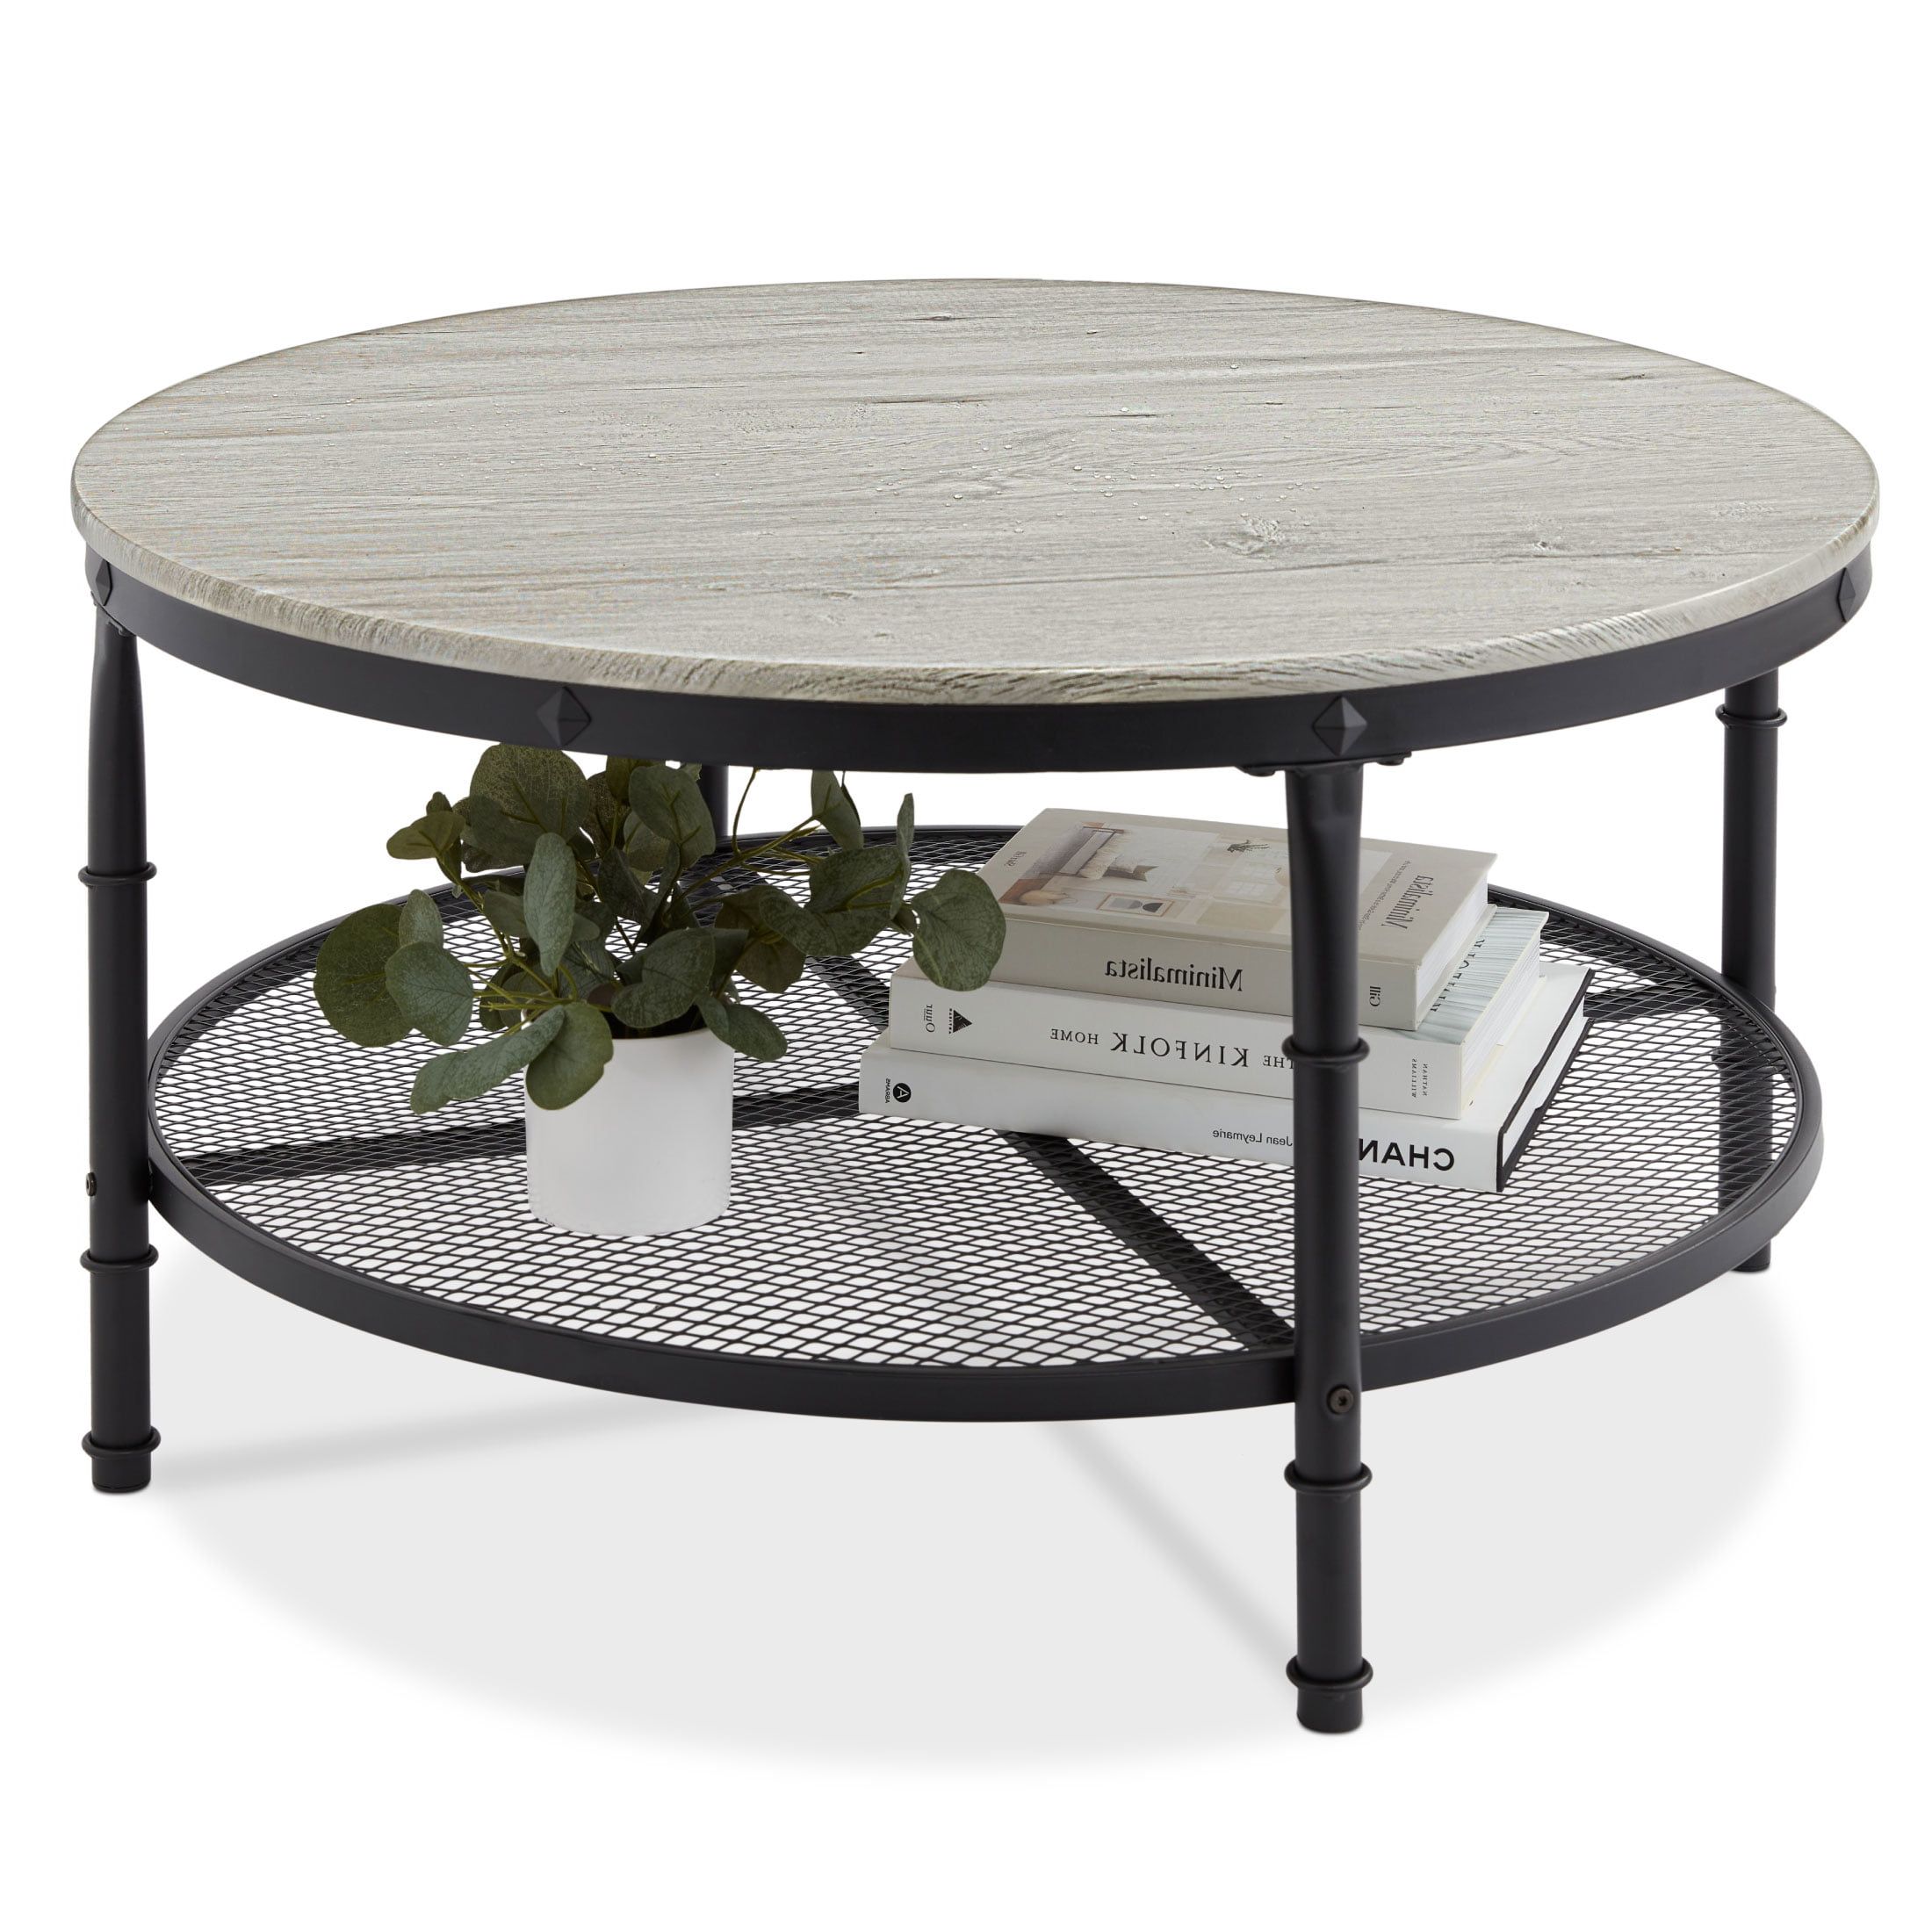 Open Shelf Outdoor Tables With Regard To Current Best Choice Products 2 Tier Round Coffee Table, Rustic Accent Table W/  Wooden Tabletop, Padded Feet, Open Shelf – Gray – Walmart (View 11 of 15)